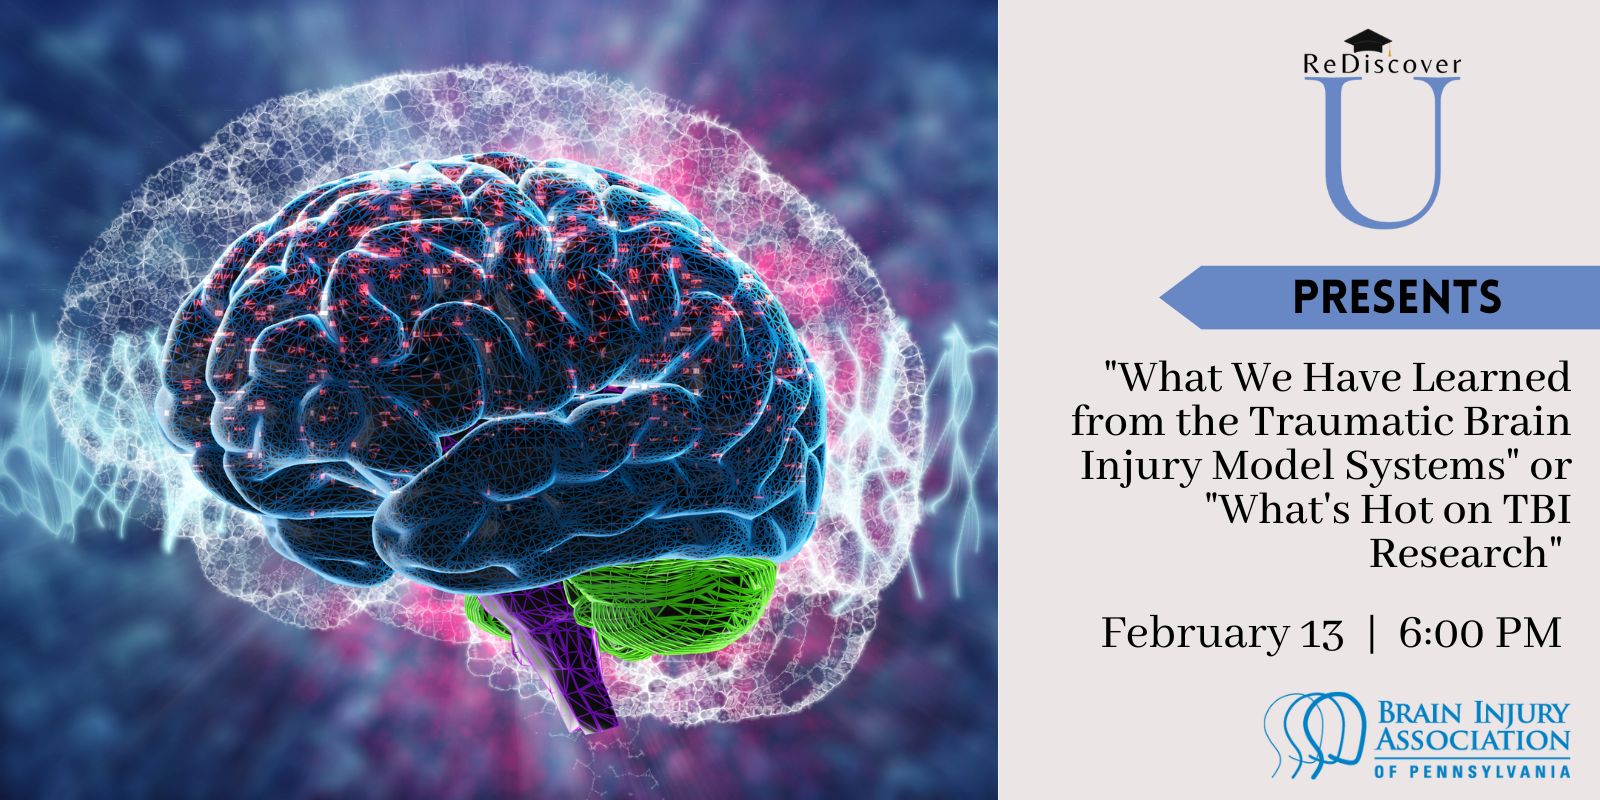 "What We Have Learned from the Traumatic Brain Injury Model Systems" or "What's Hot on TBI Research" 